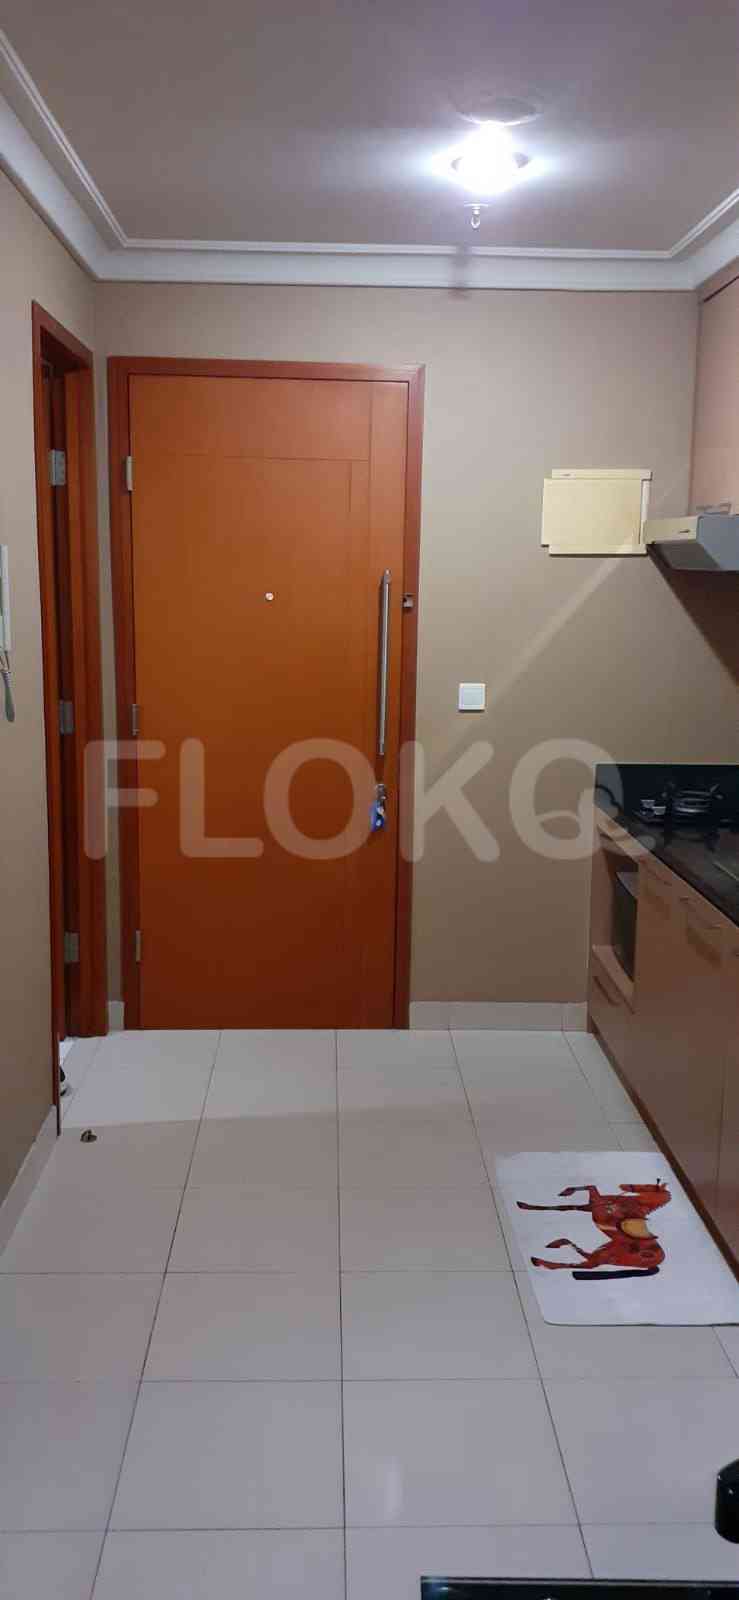 2 Bedroom on 11th Floor for Rent in Kuningan Place Apartment - fku092 9